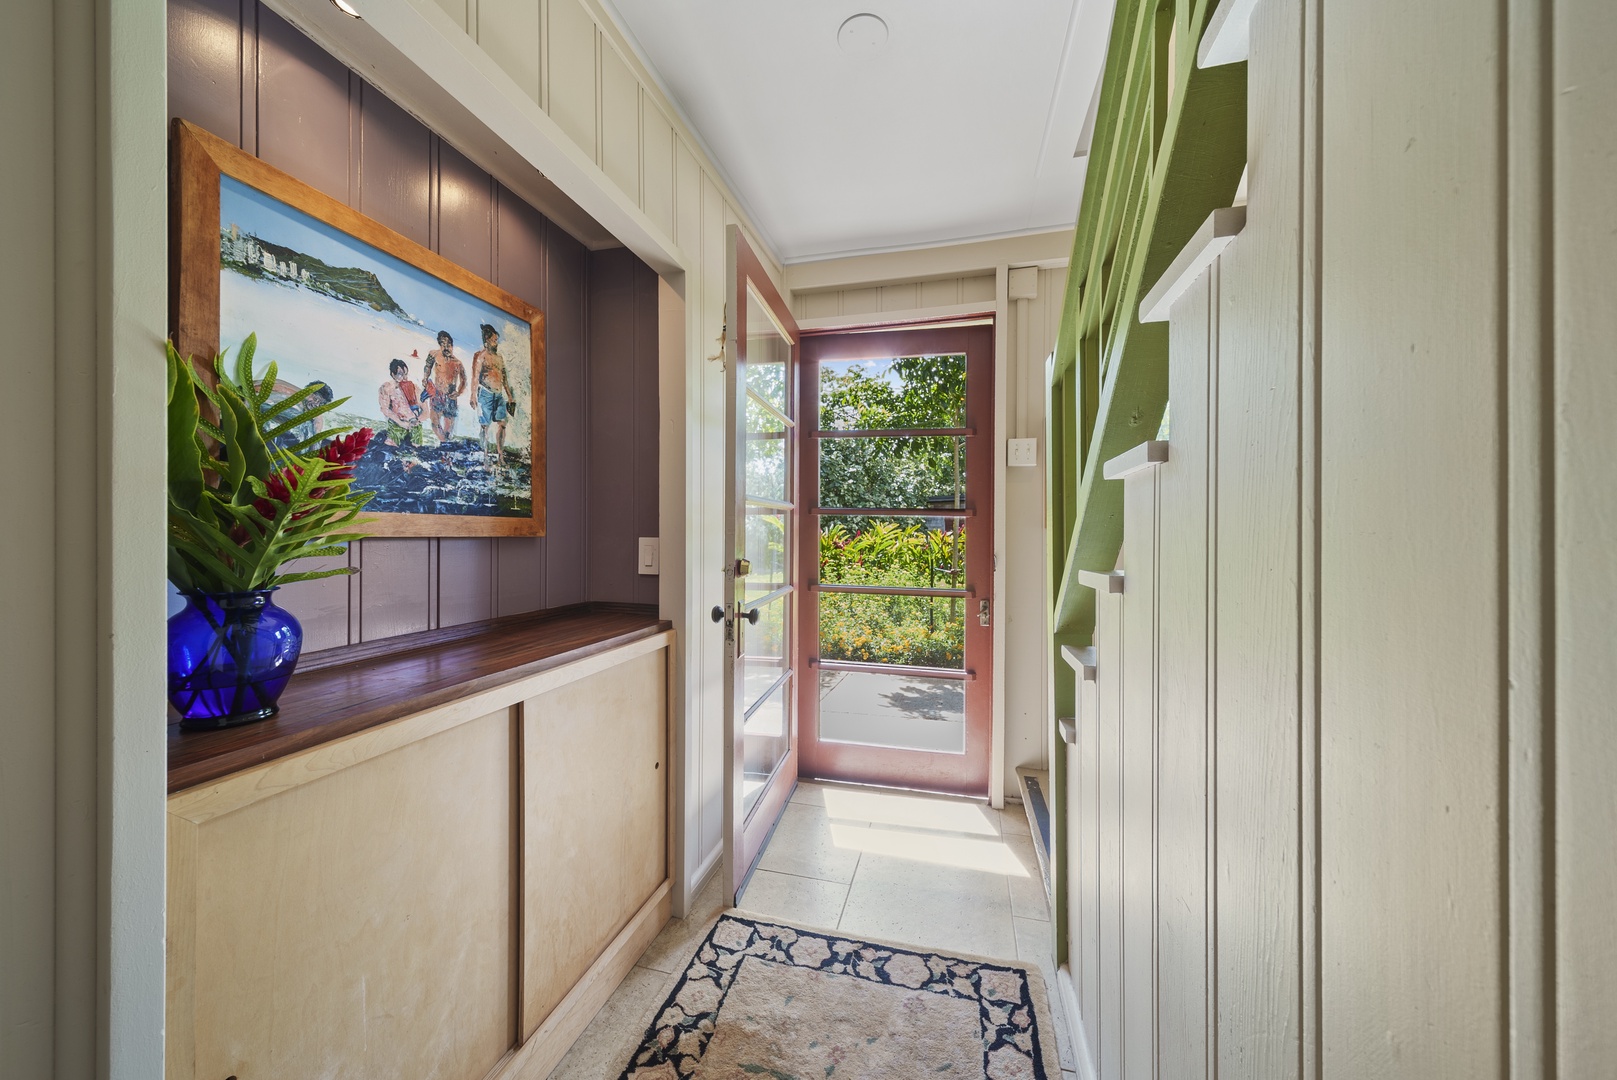 Haleiwa Vacation Rentals, Hale Anahulu - Entryway showing stairs to upper-level guest bedroom